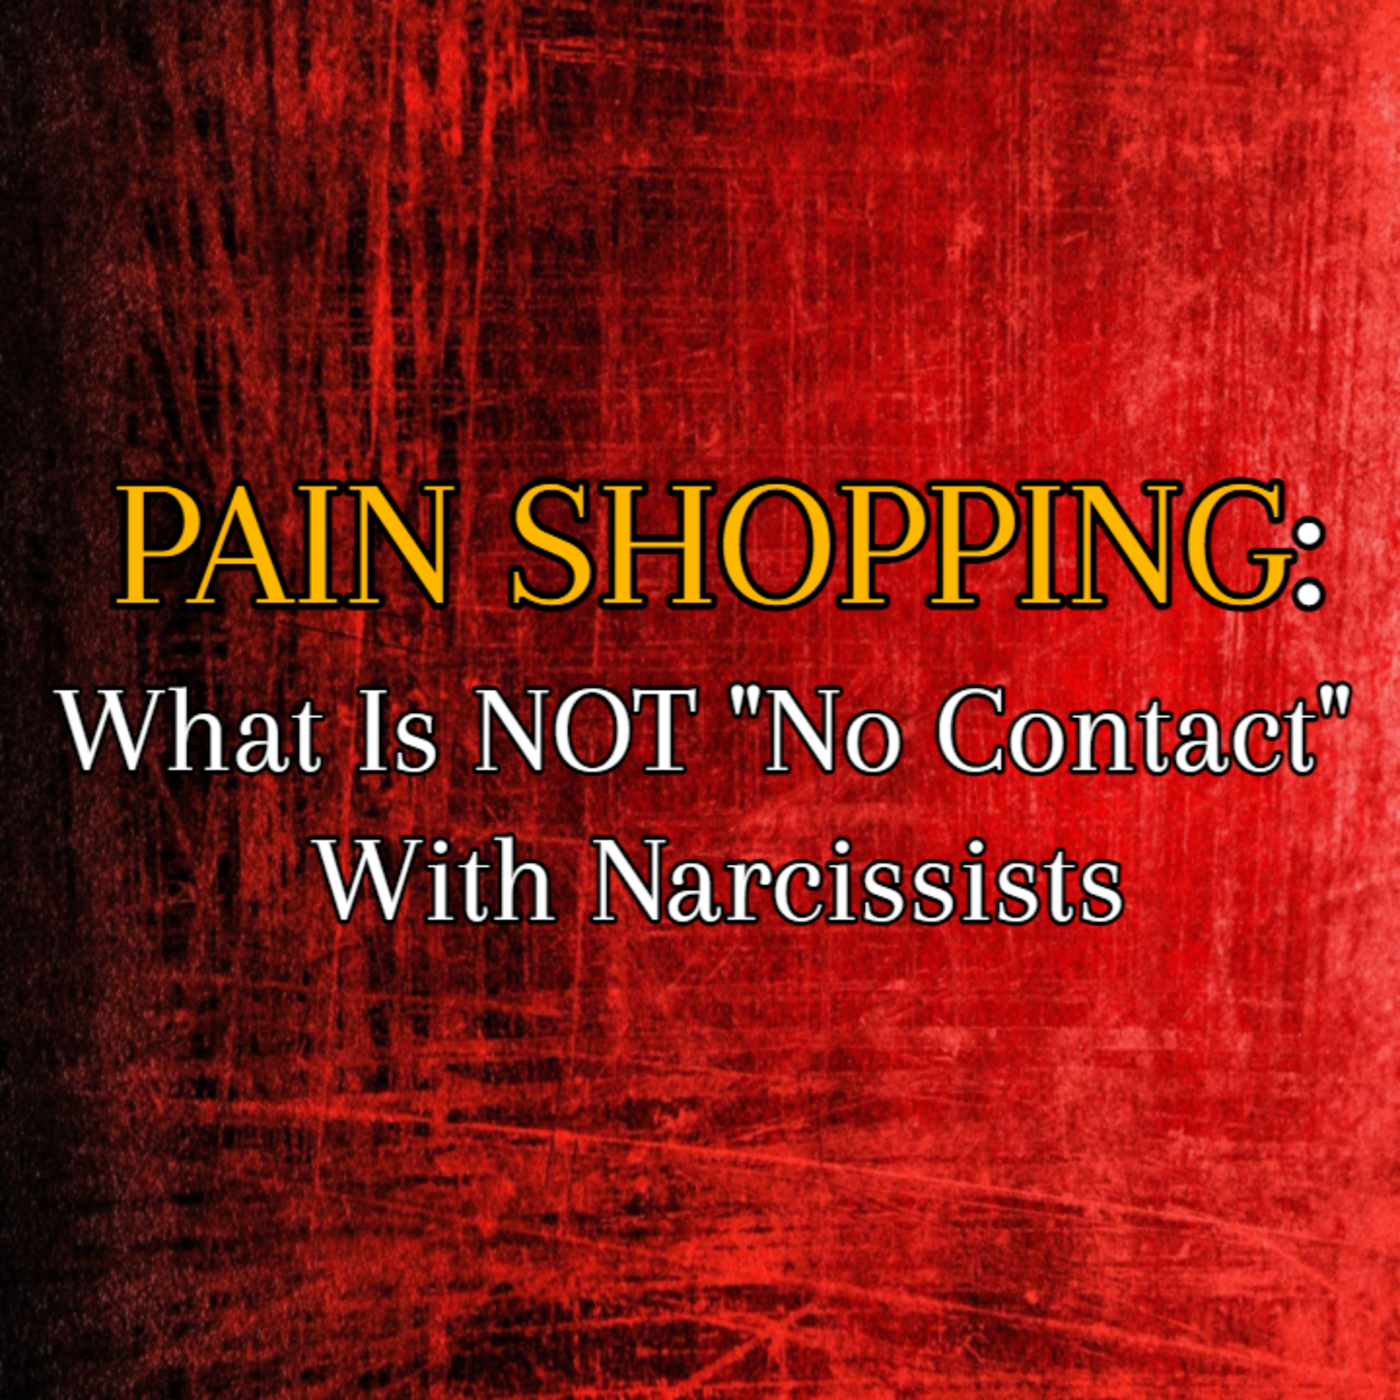 Episode 217: Pain Shopping: What Is NOT 